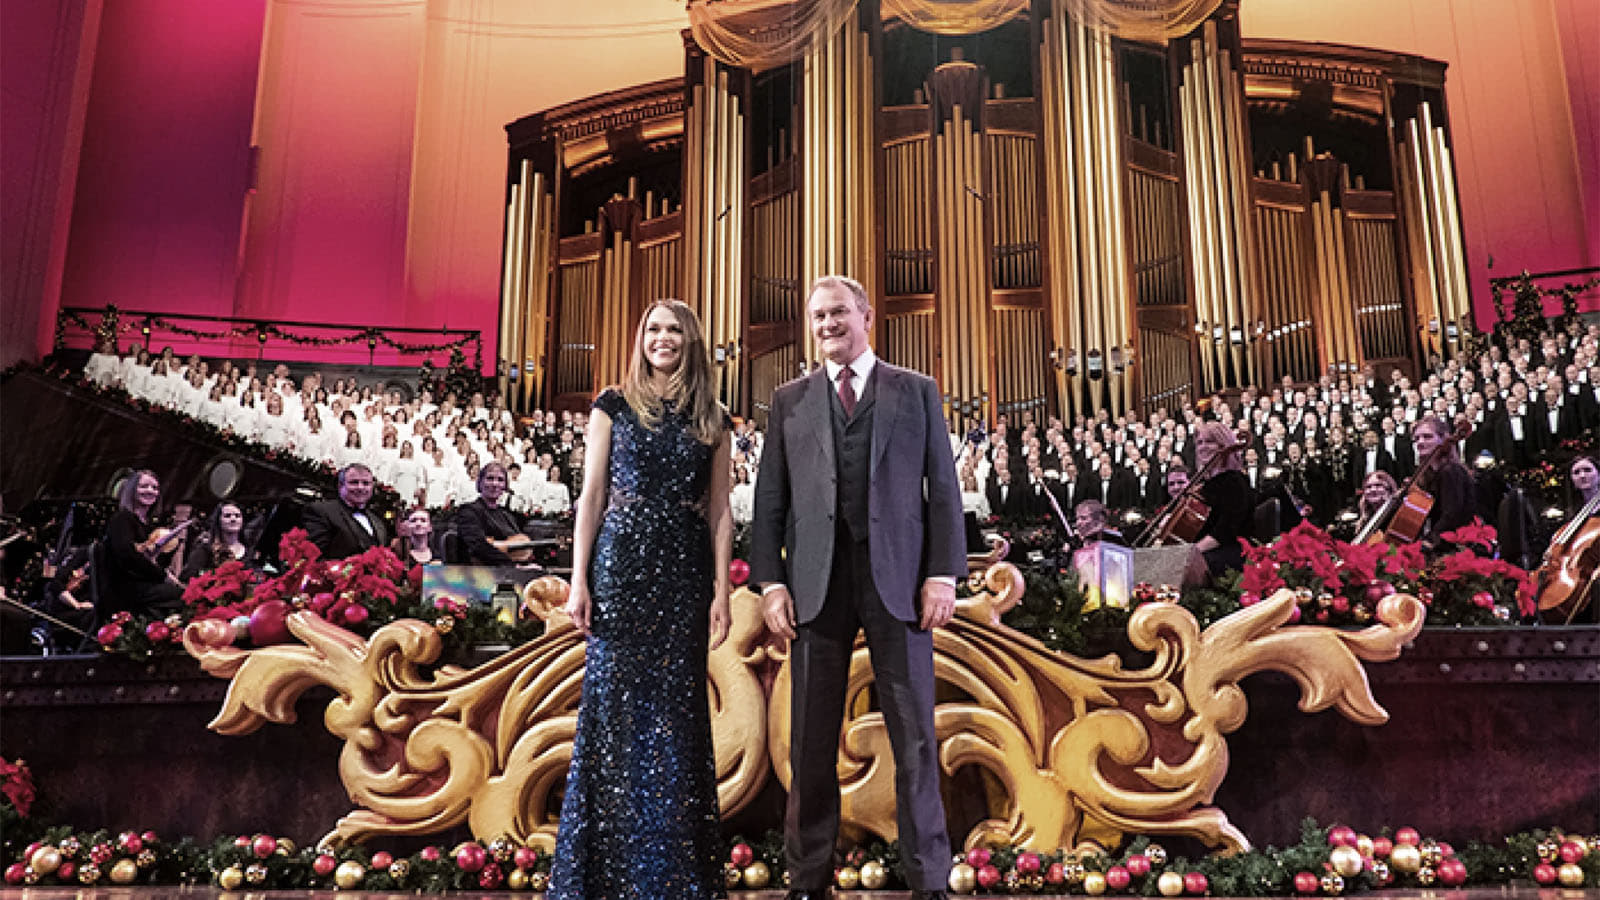 A Merry Little Christmas with Sutton Foster and Hugh Bonneville (2018)